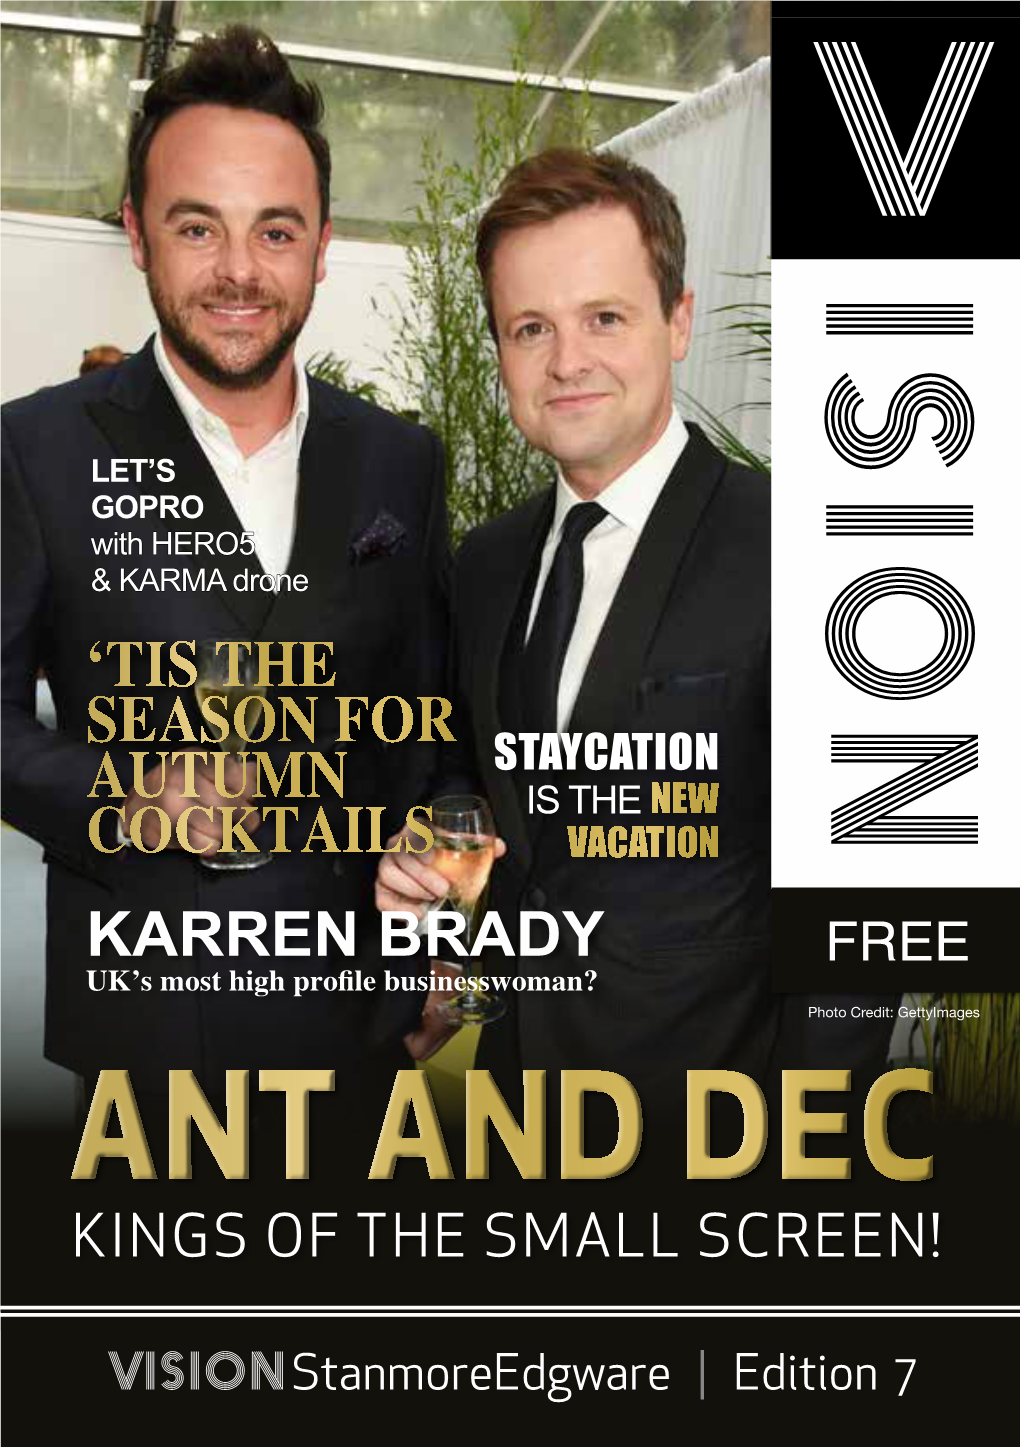 Ant and Dec Kings of the Small Screen!